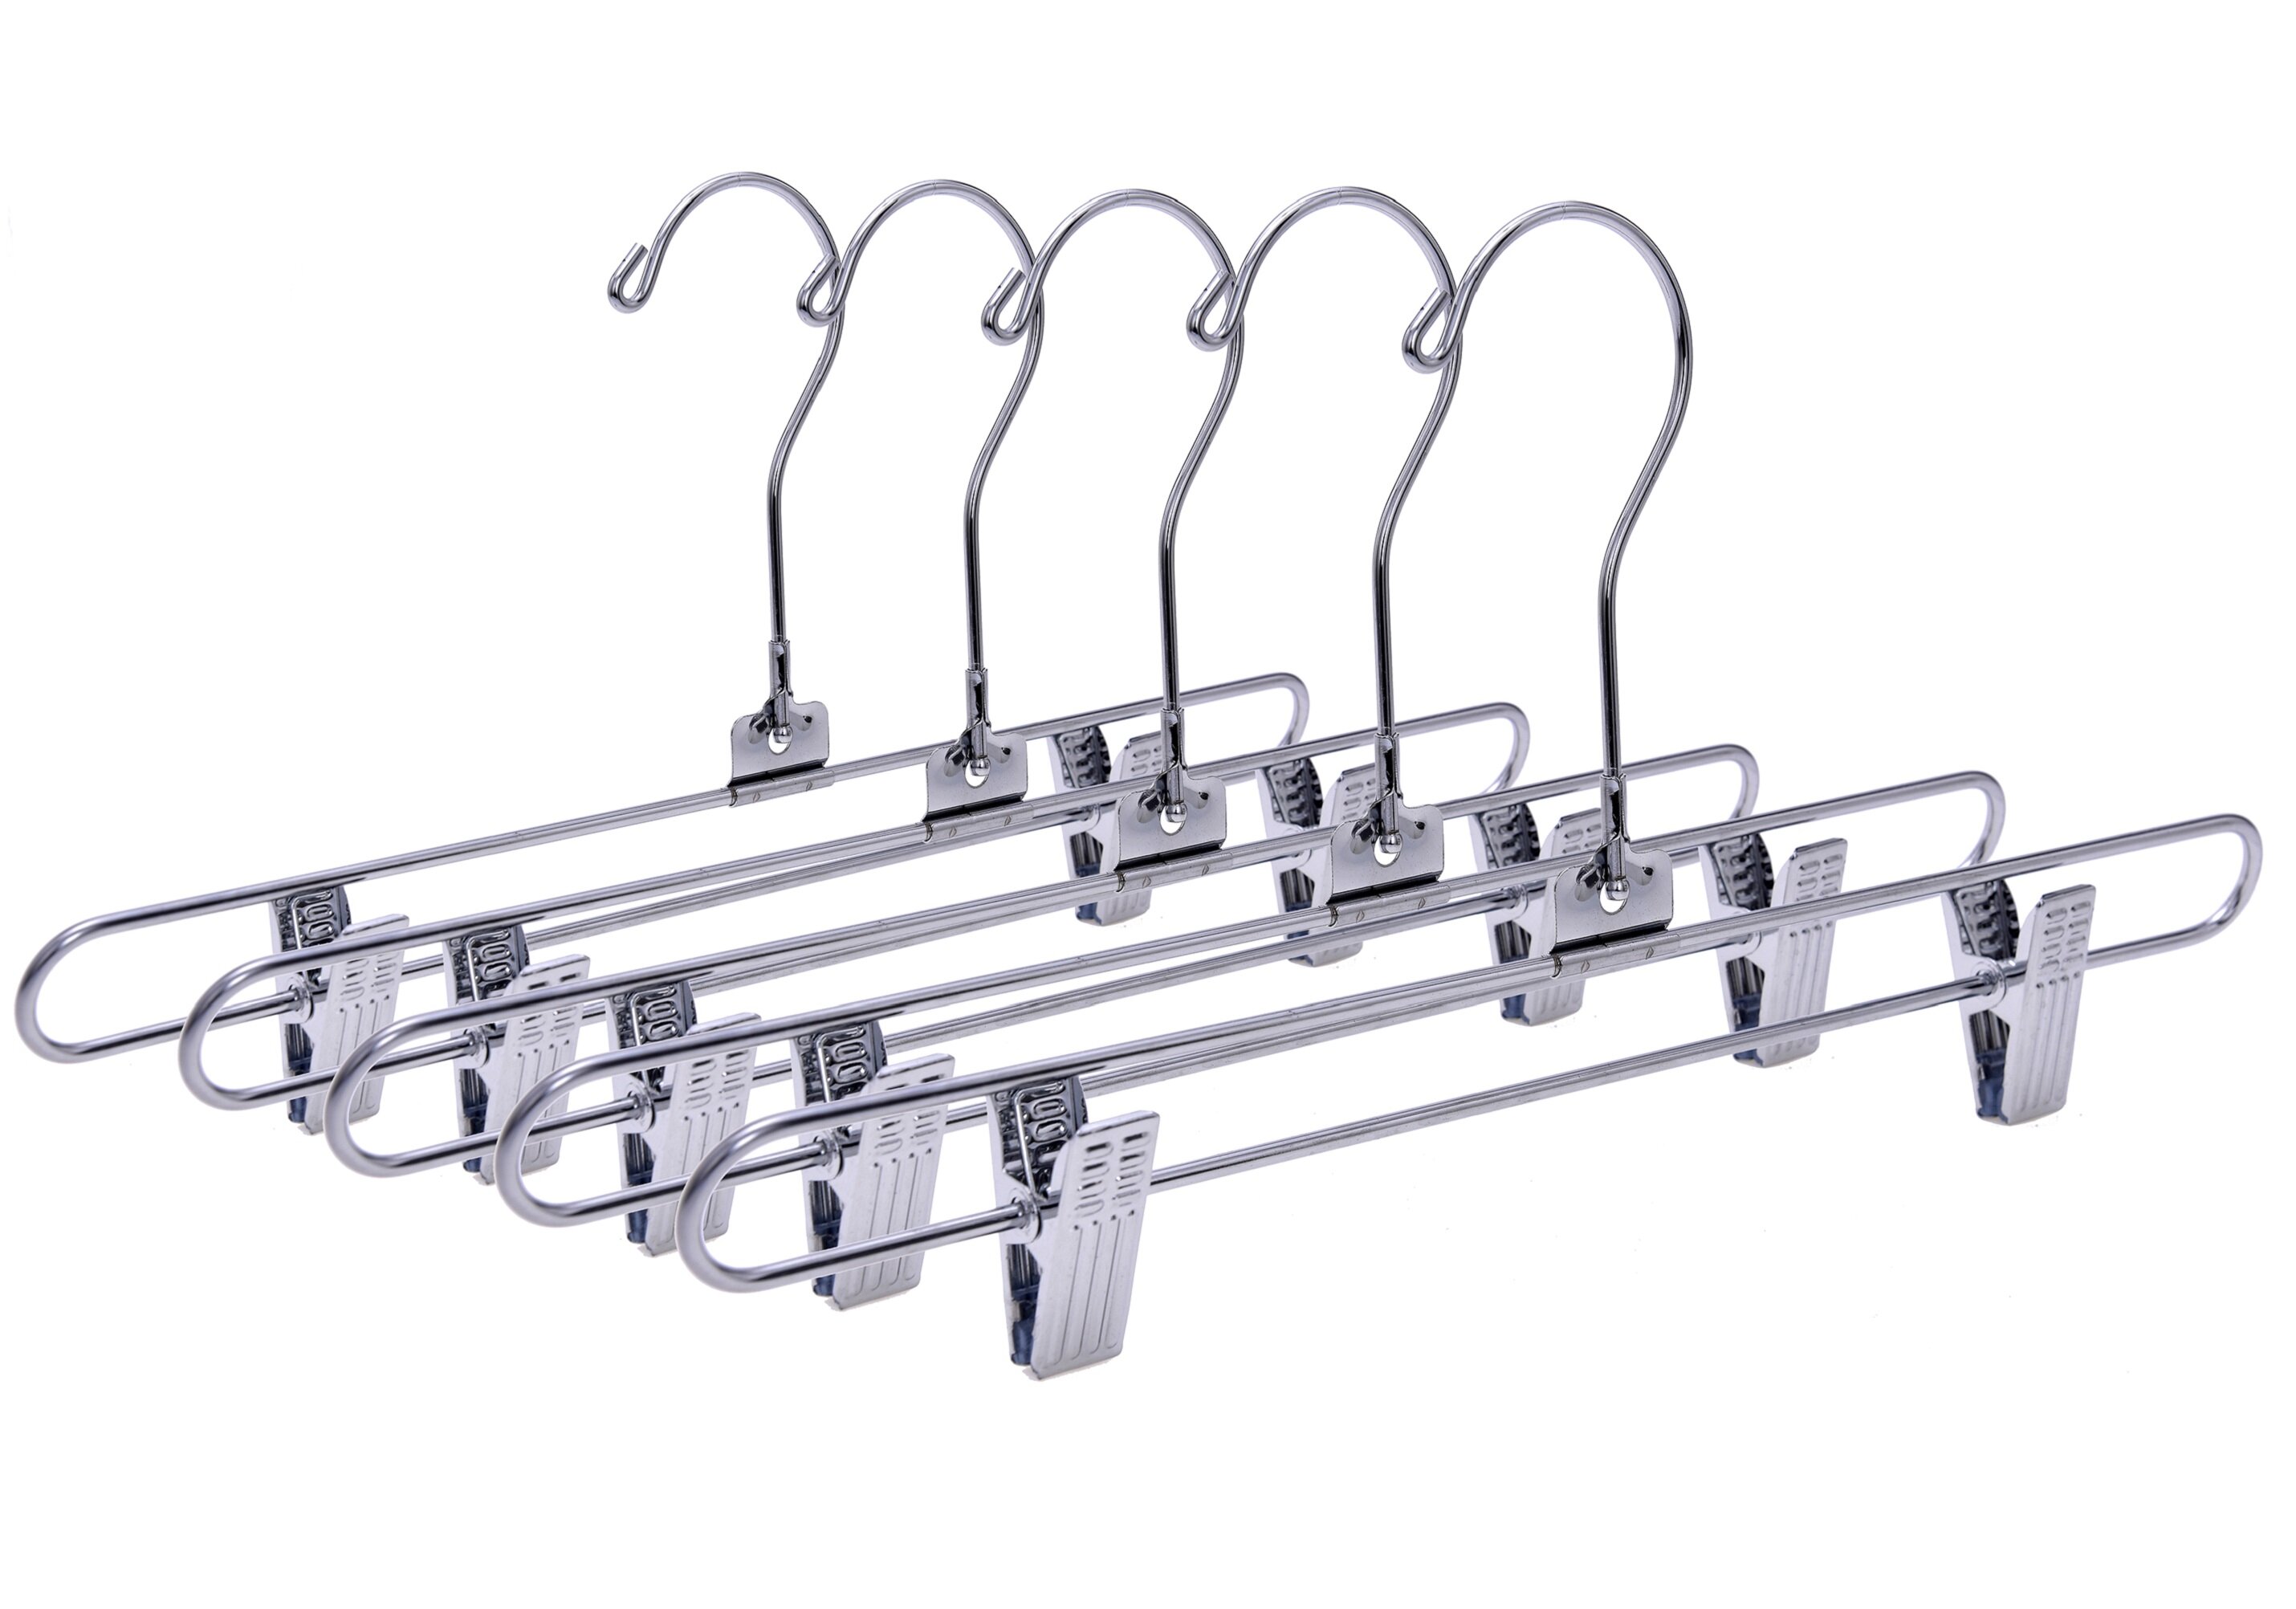 Pack of 25 Wooden Trouser Hangers with Adjustable Clips  Displaysense